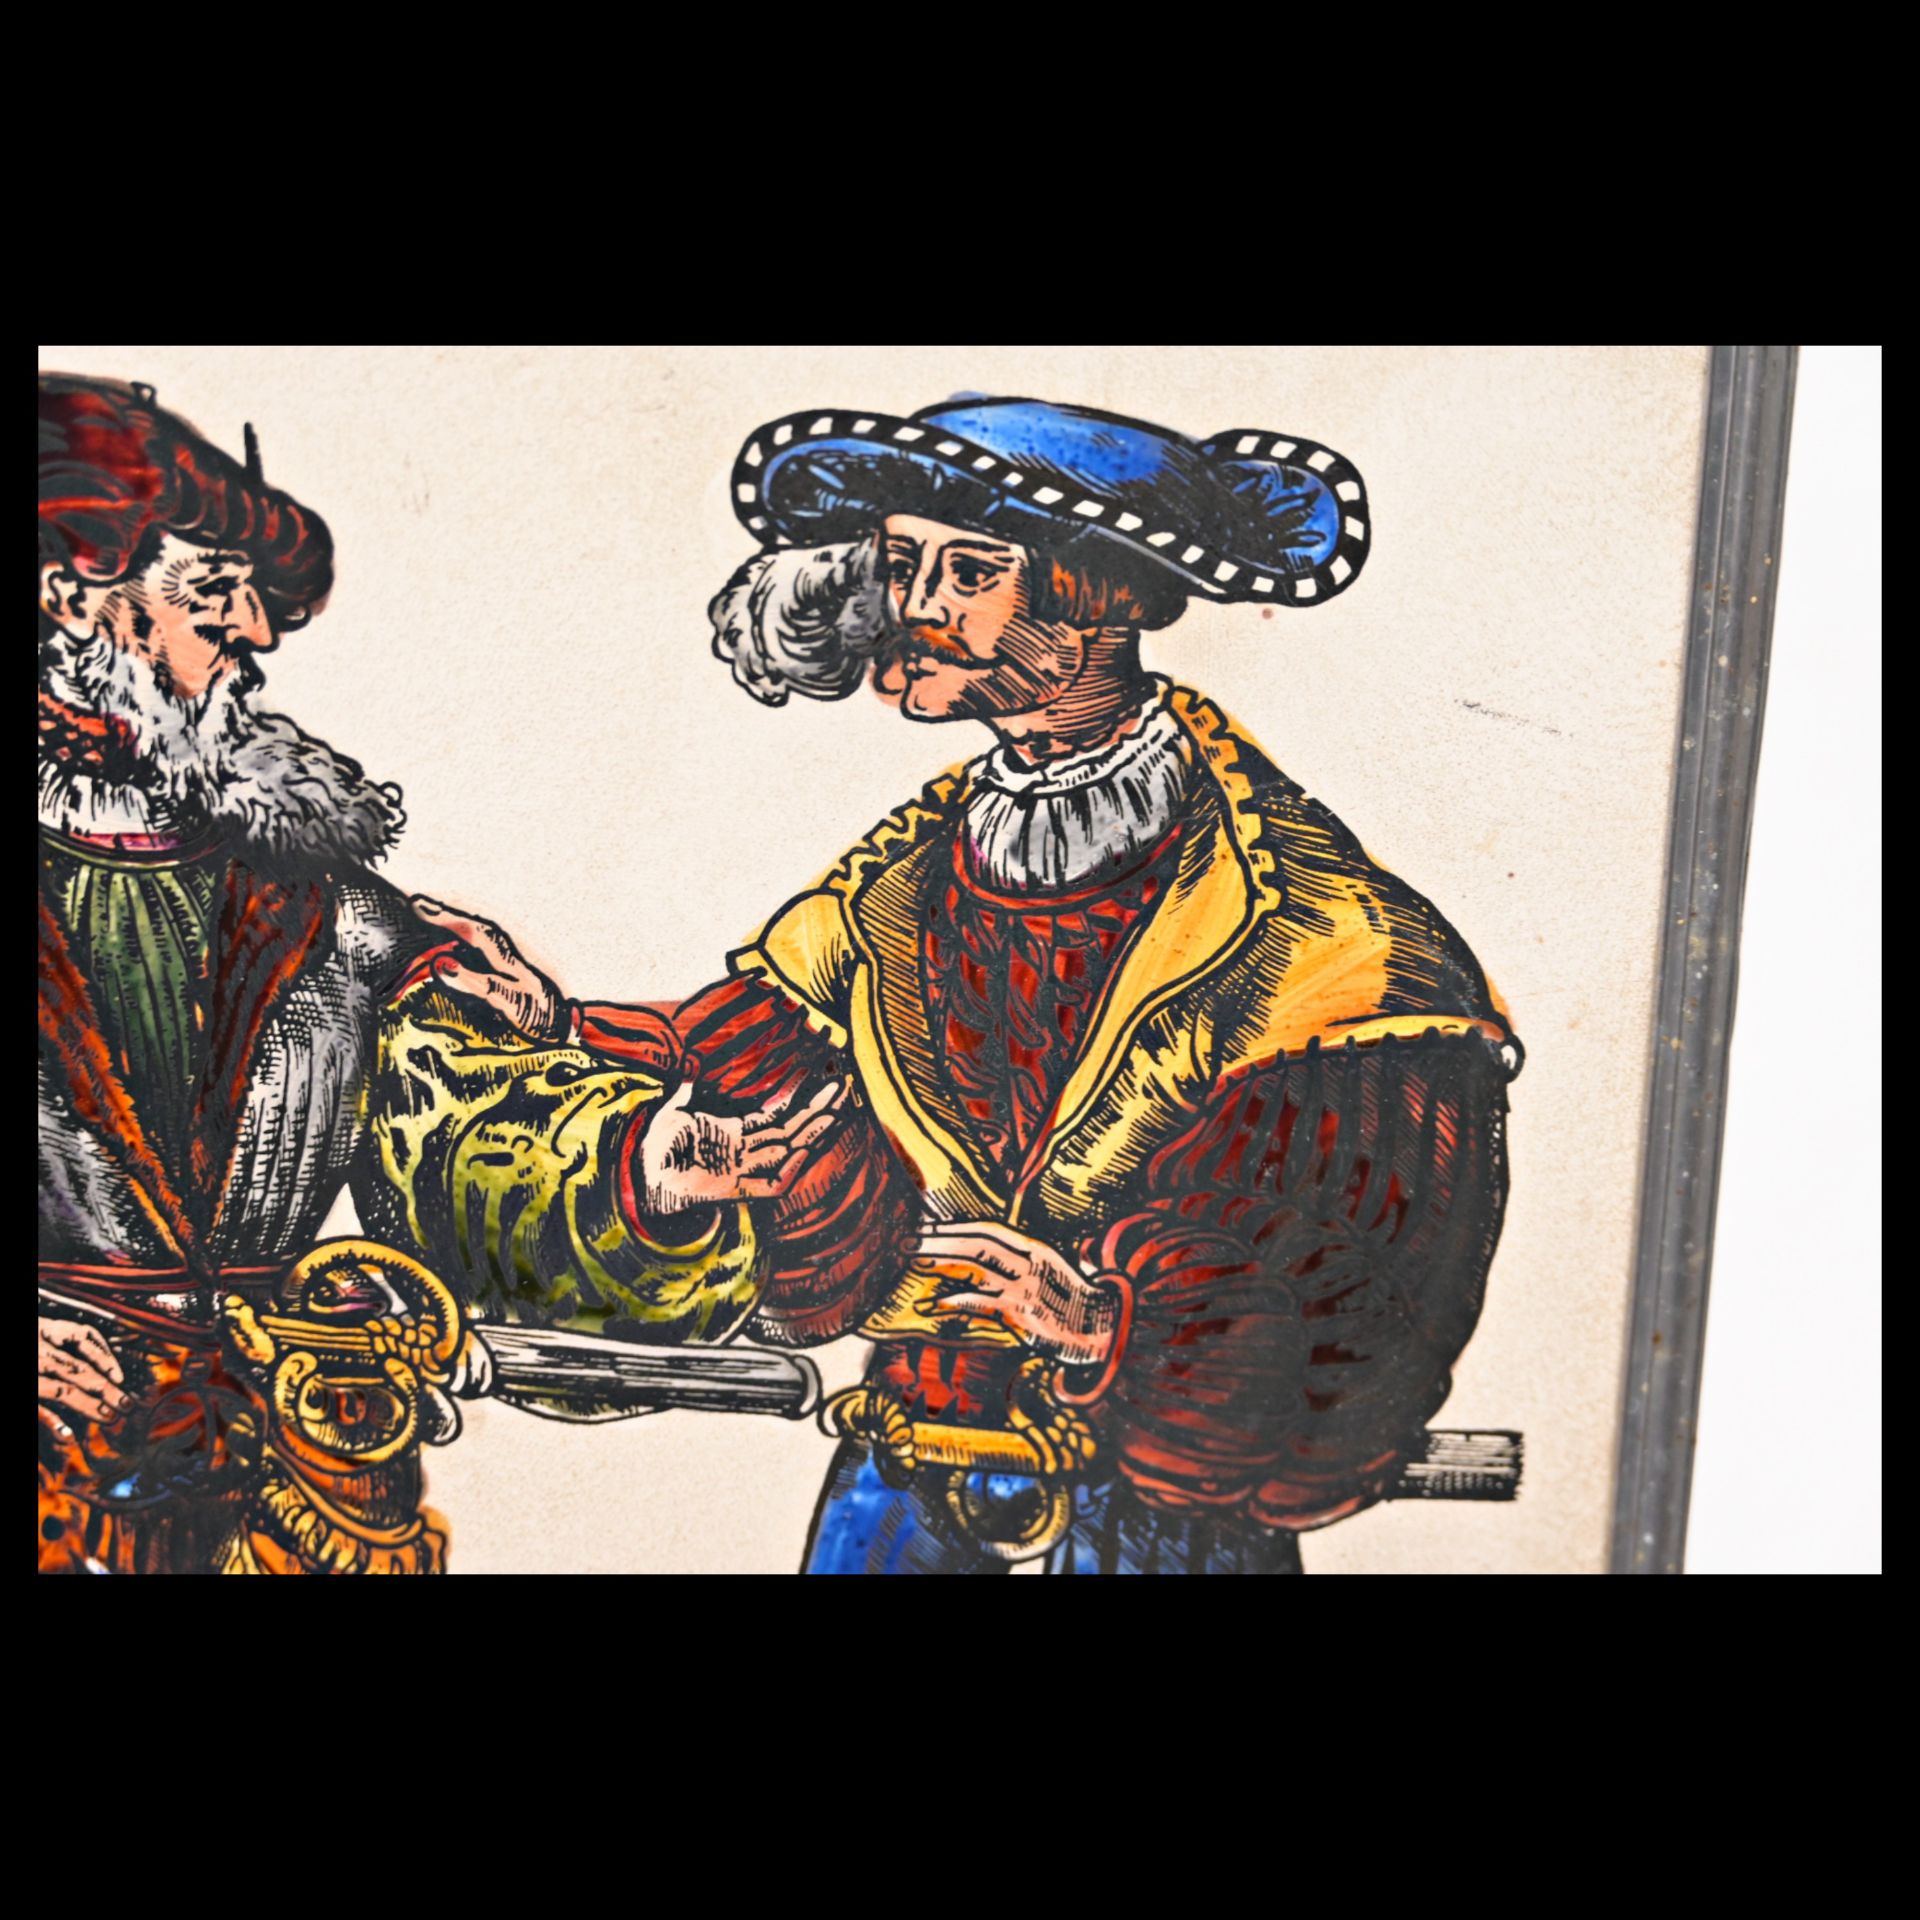 Landsknechts, Painting on glass in the style of 16th century engravings. - Bild 4 aus 8